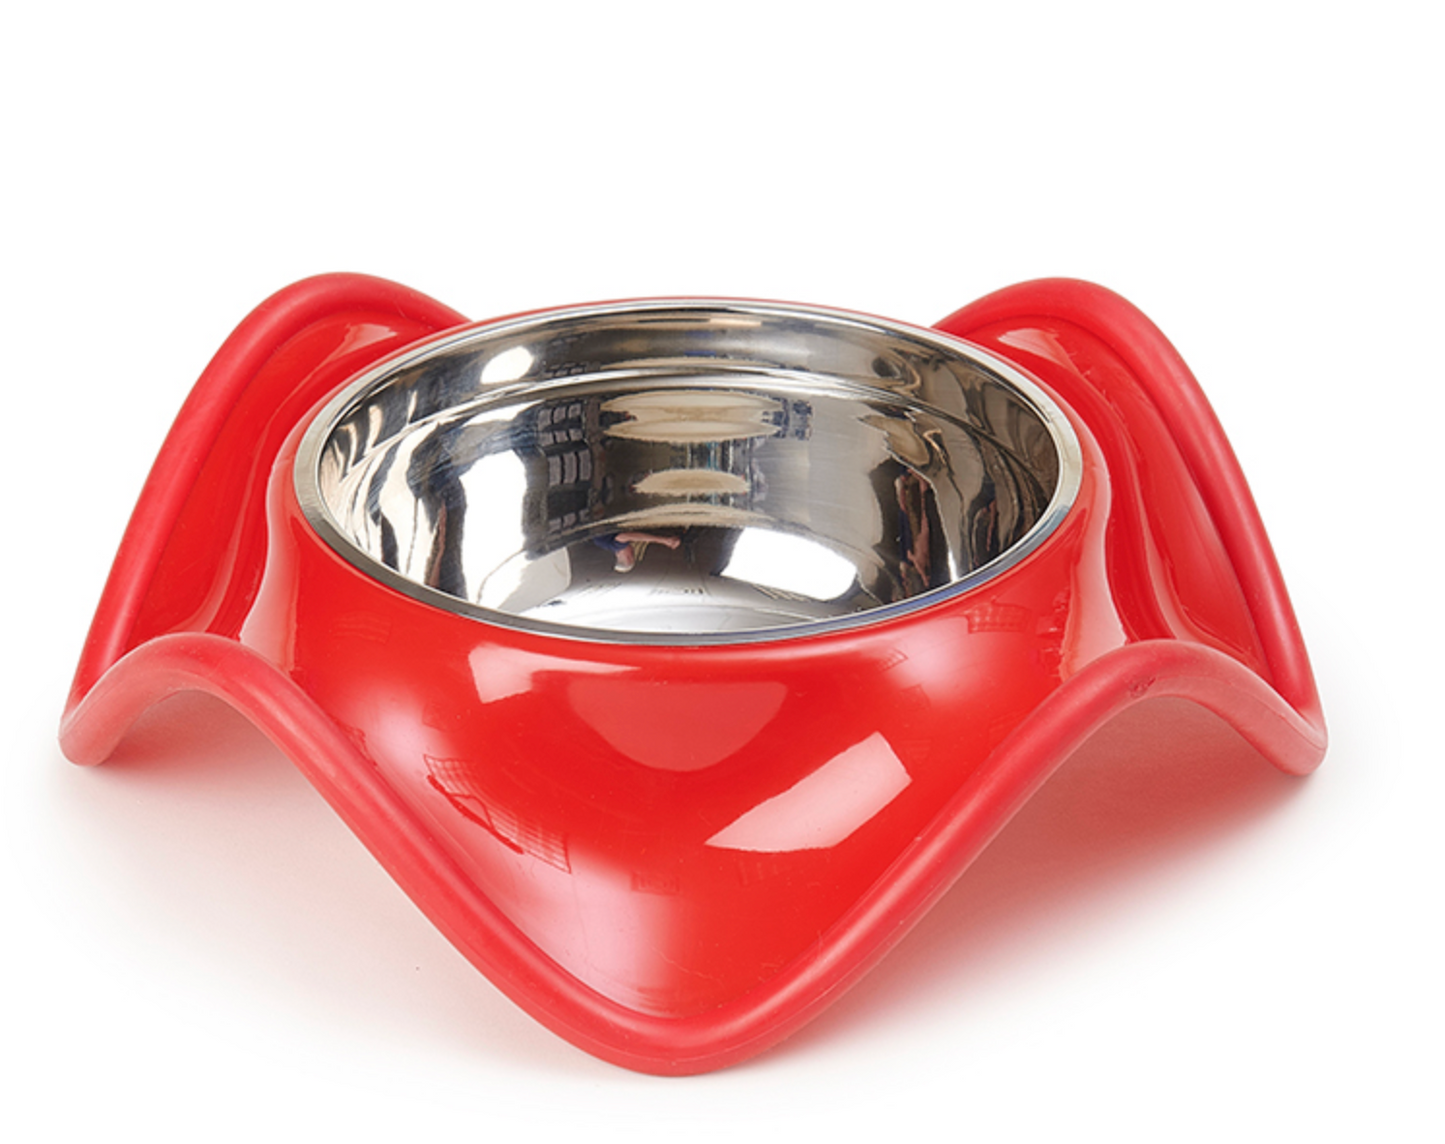 Milos Stainless Steel Pet Bowl, Red